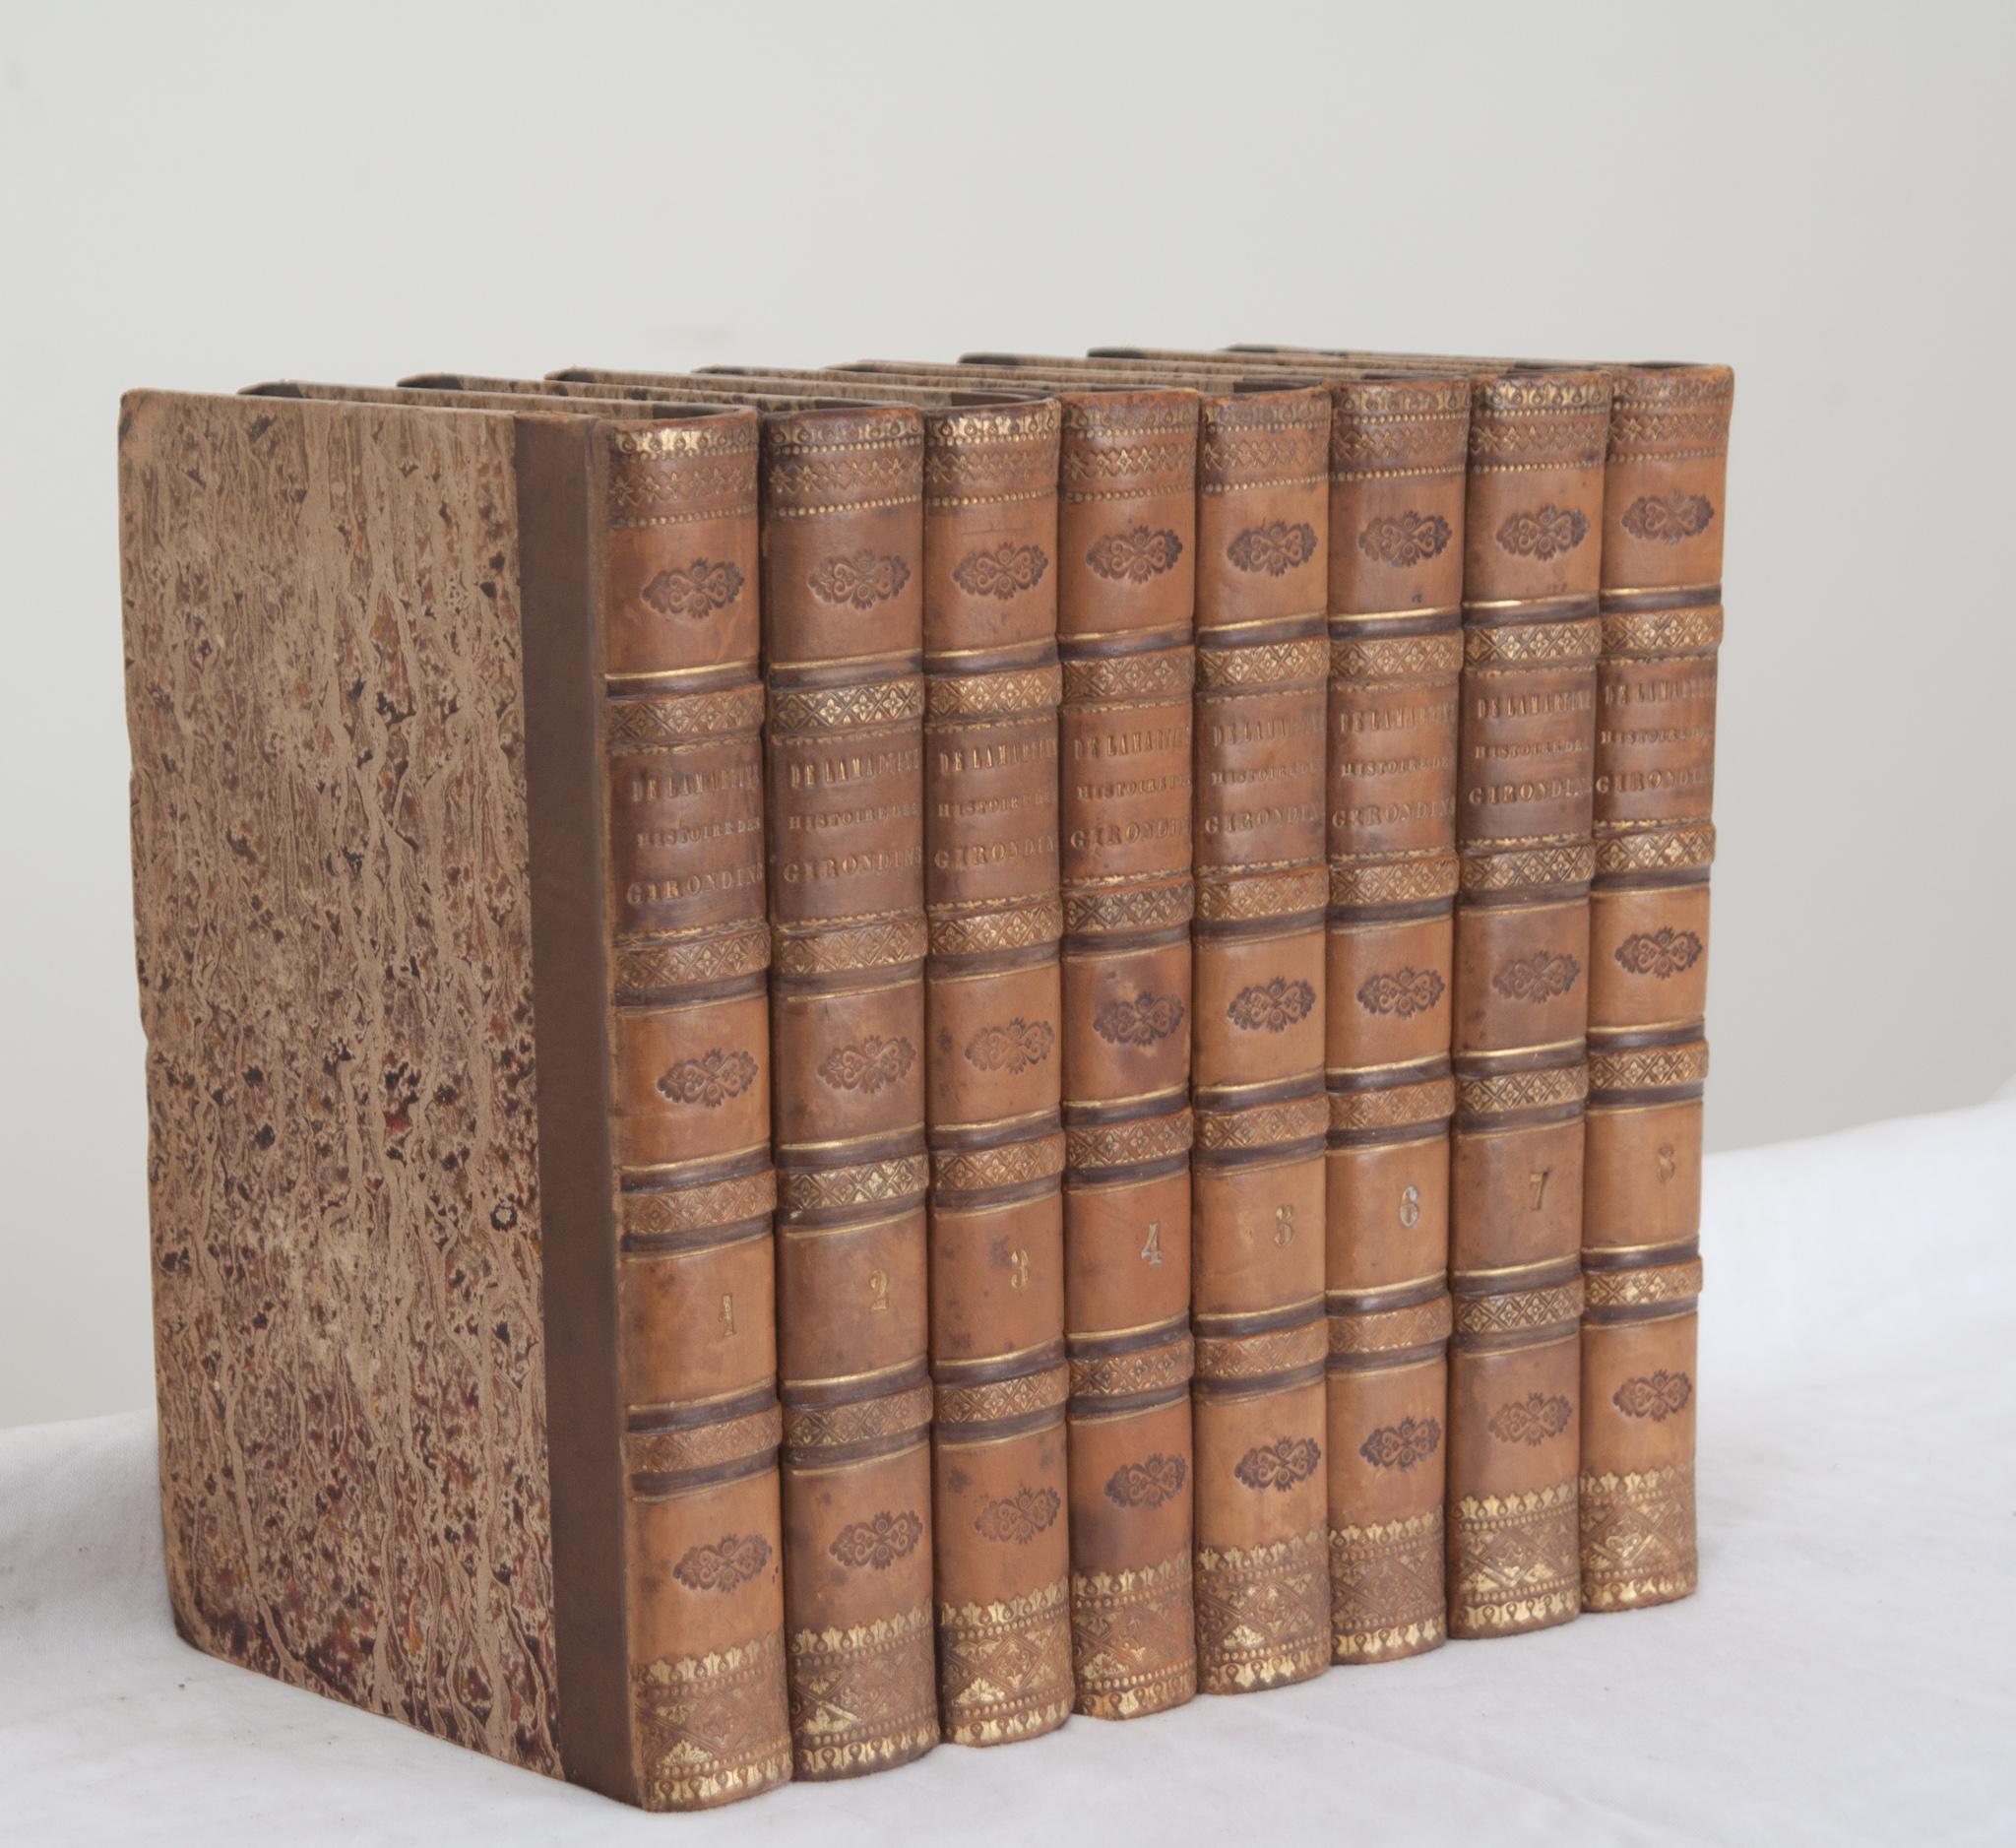 French Set of 8 Leather-Bound Books by A. de Lamartine